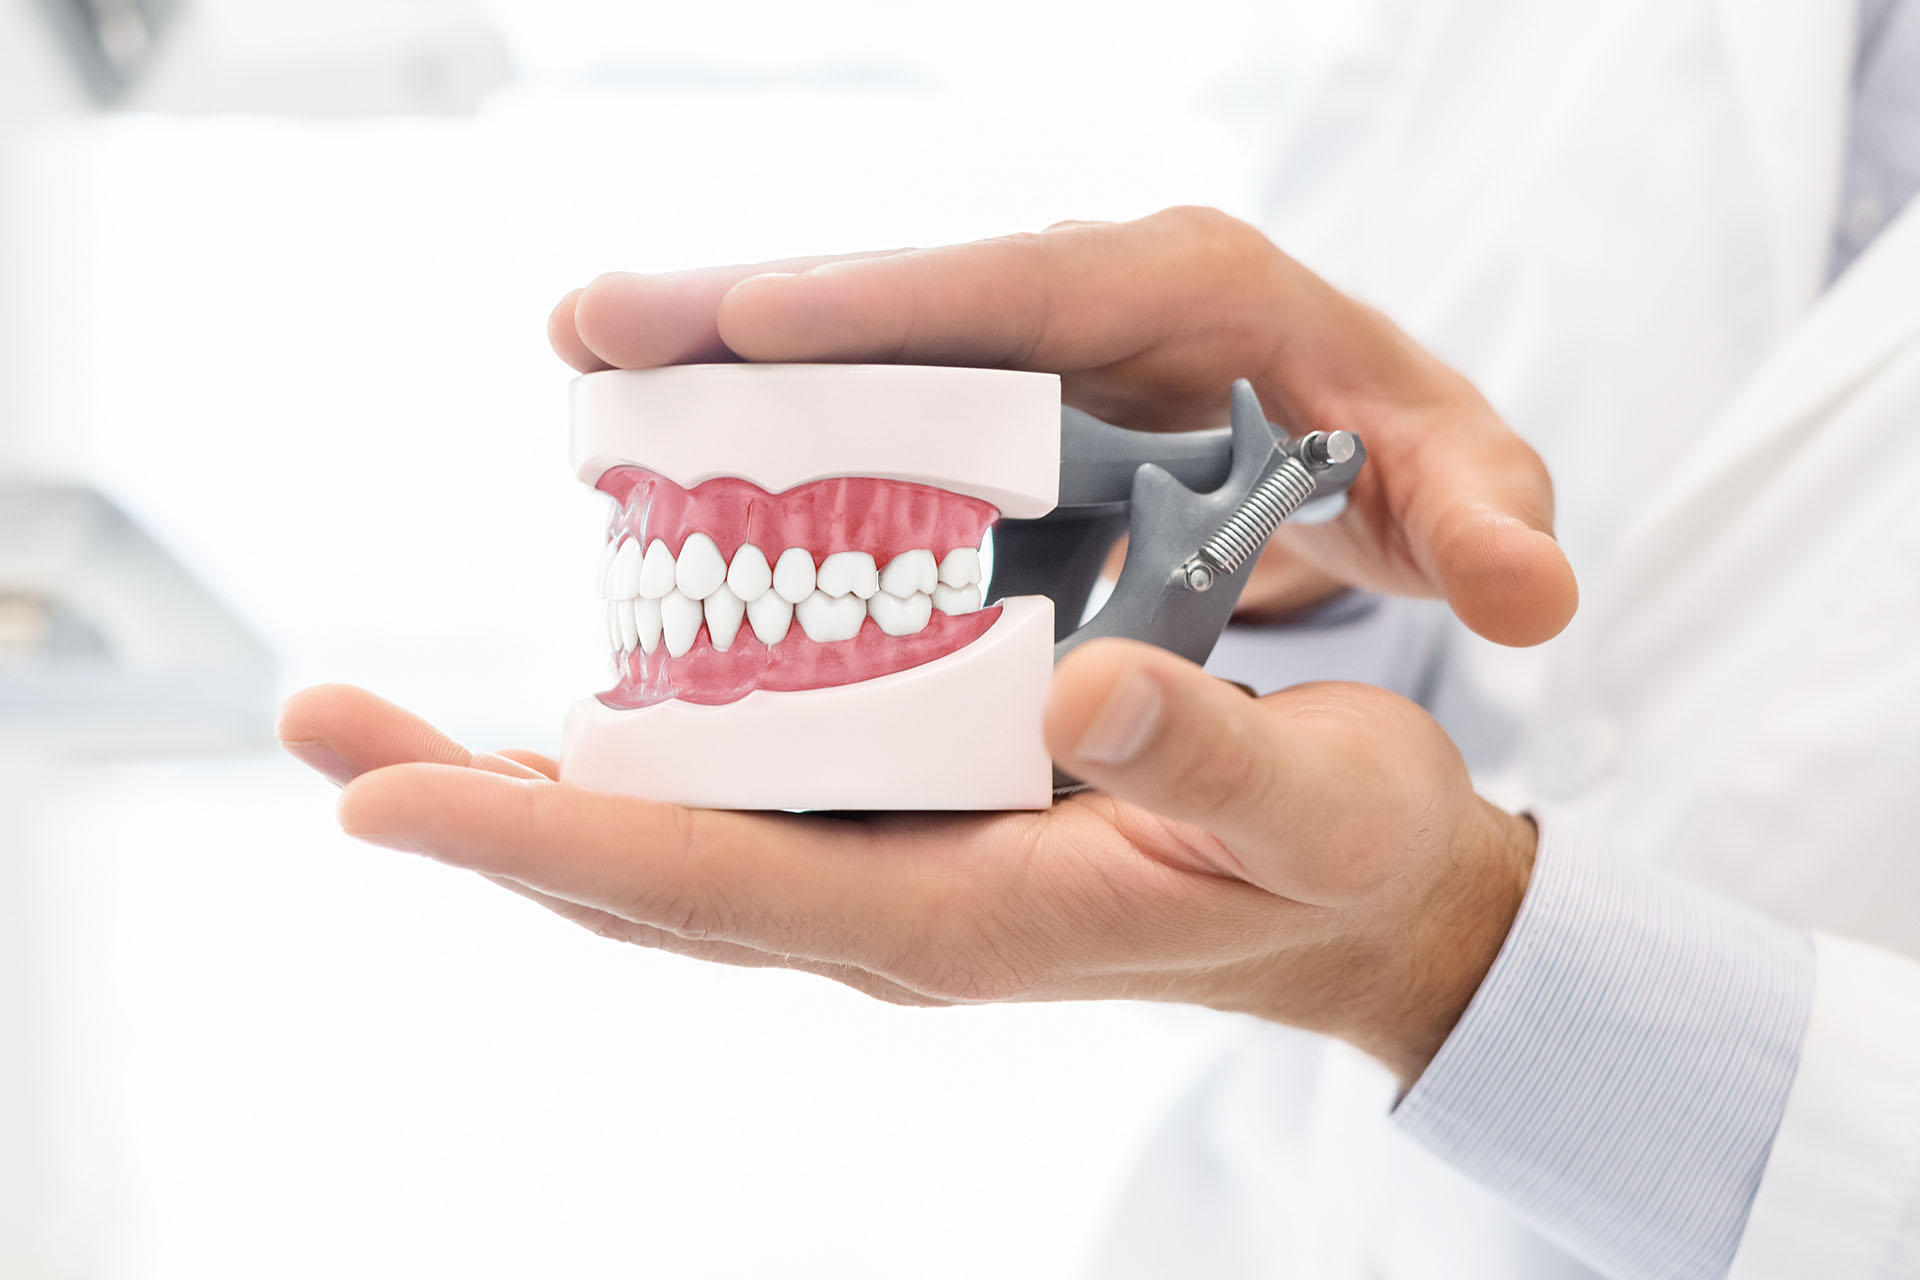 Orthodontist holding a model of a patient's upper and lower teeth to show how the upper and lower jaw should fit together